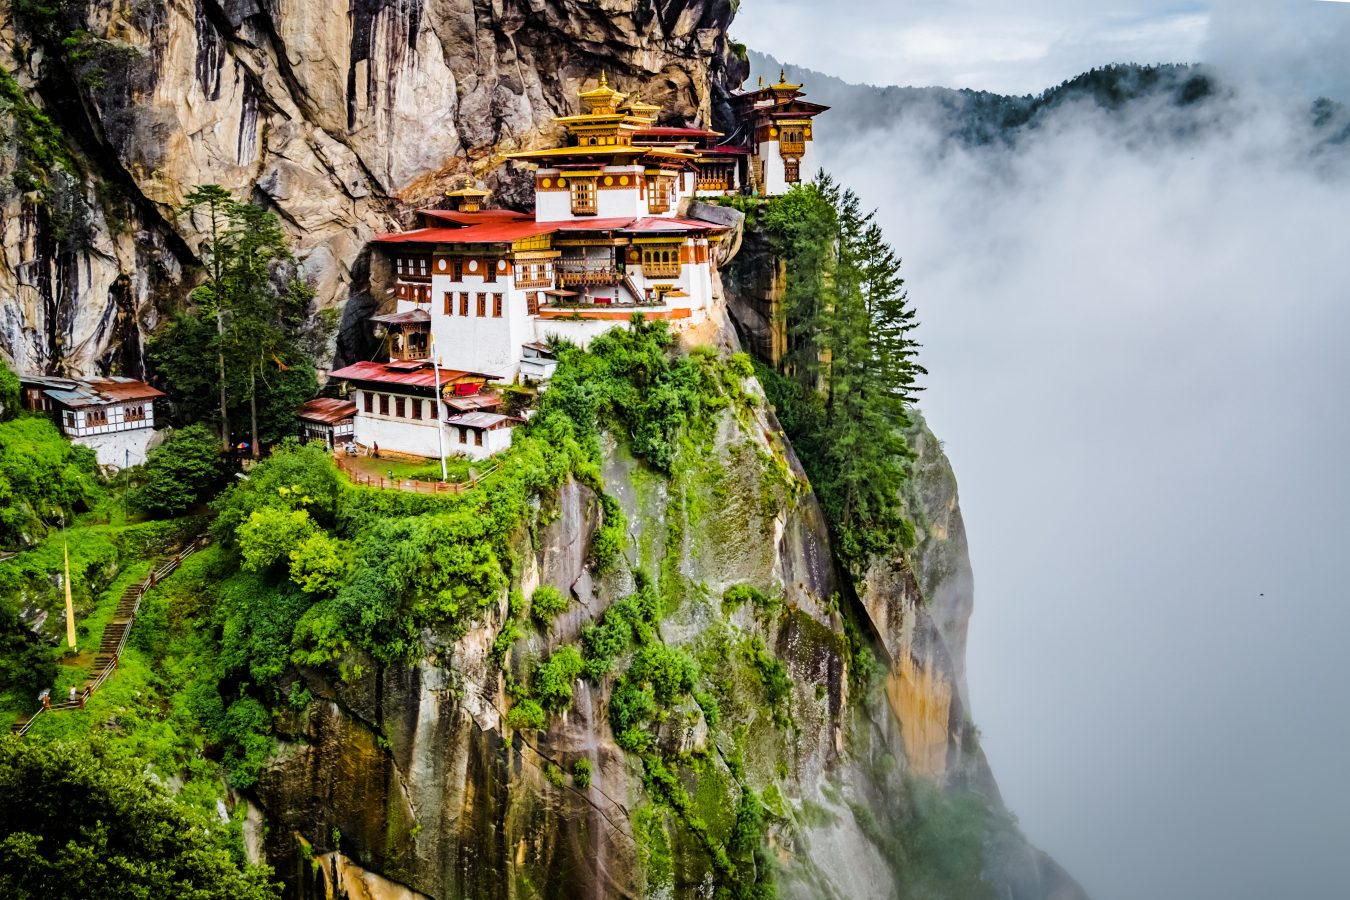 View of Tiger's nest monastery in Bhutan which sits on the side of a mountain cliff as clouds of mountains are in the valley beside.